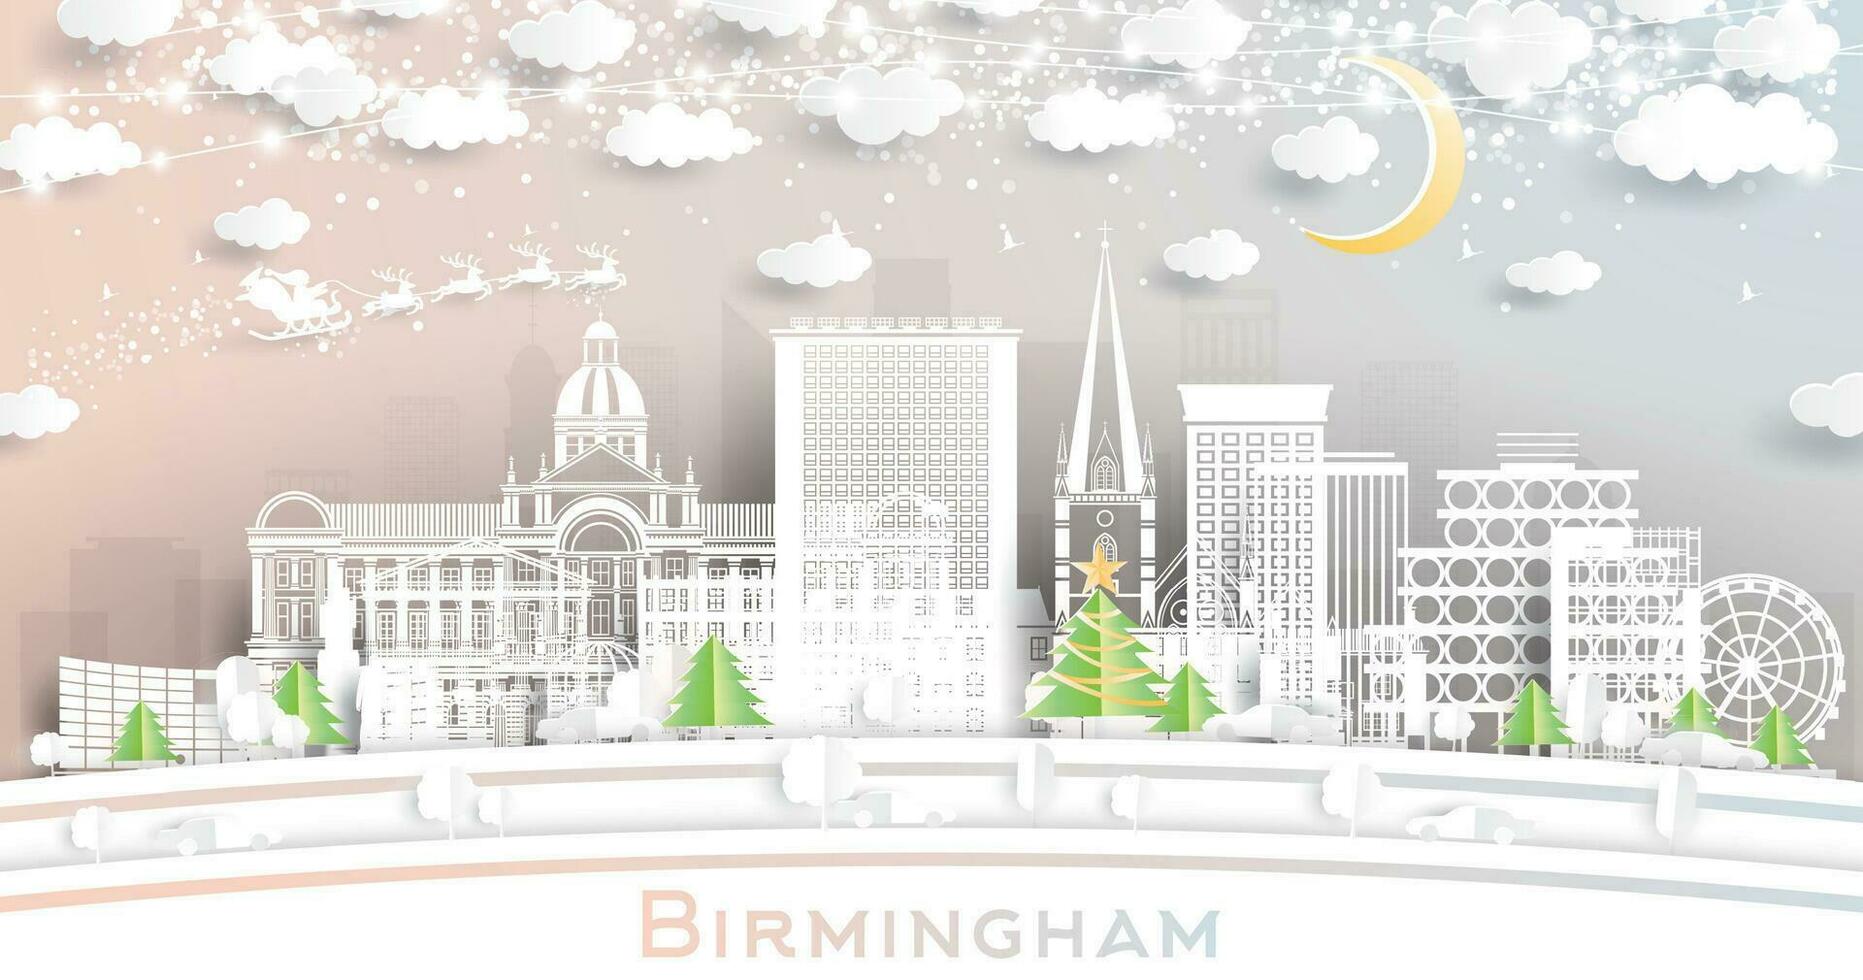 Birmingham UK. Winter City Skyline in Paper Cut Style with Snowflakes, Moon and Neon Garland. Christmas and New Year Concept. Birmingham Cityscape with Landmarks. vector